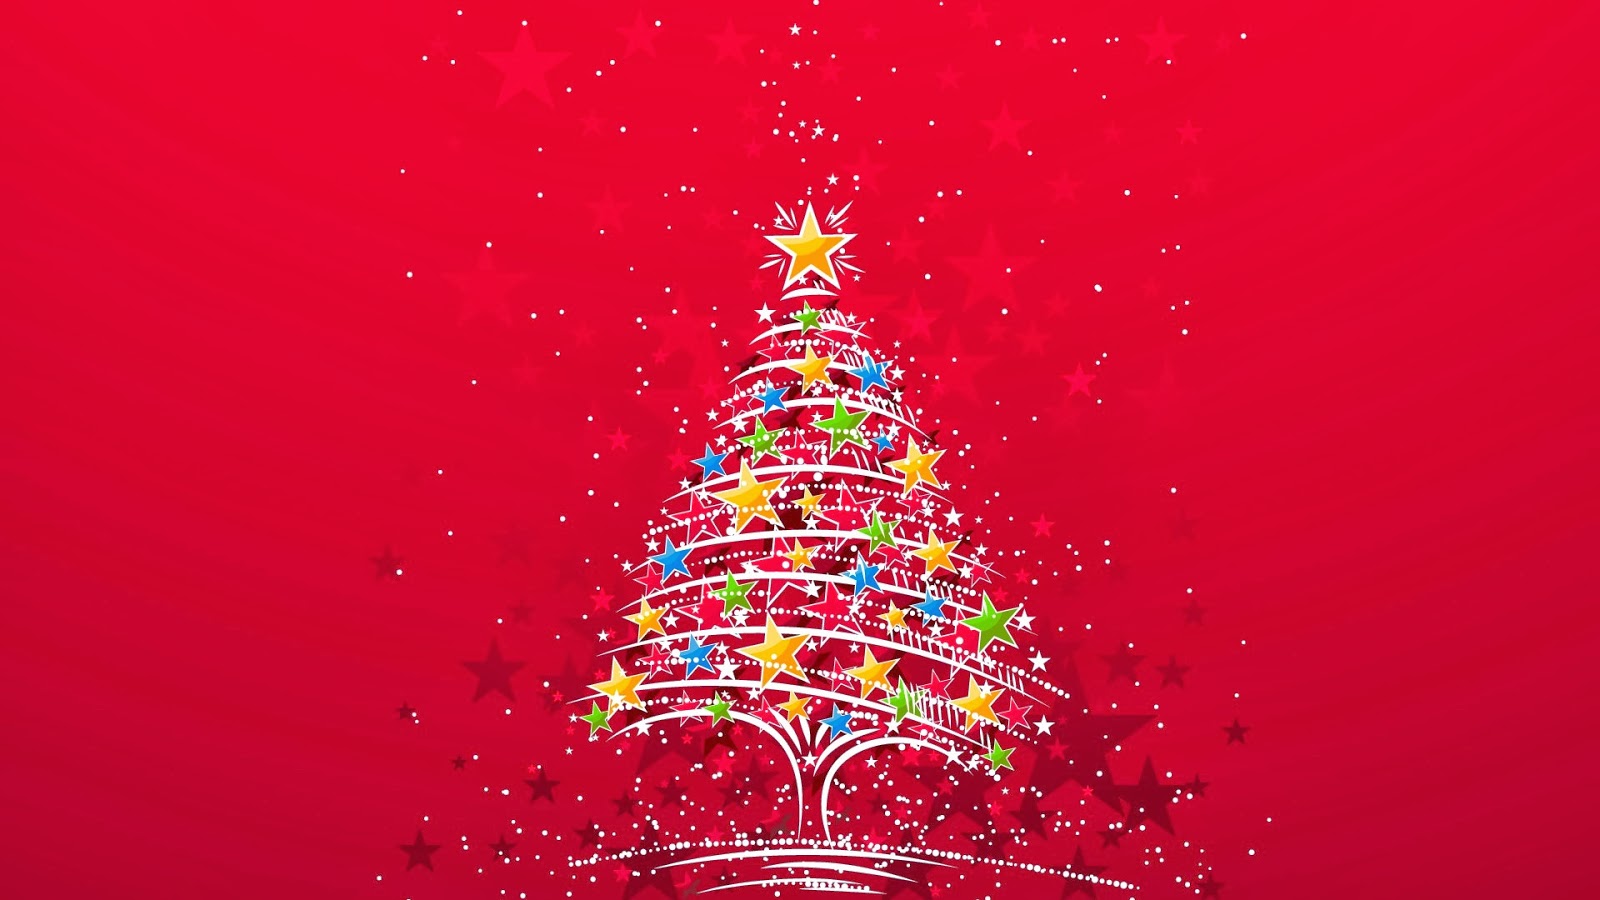 Free Wallpapers for Desktop 1920x1080 HDTV 1080p Christmas colorful